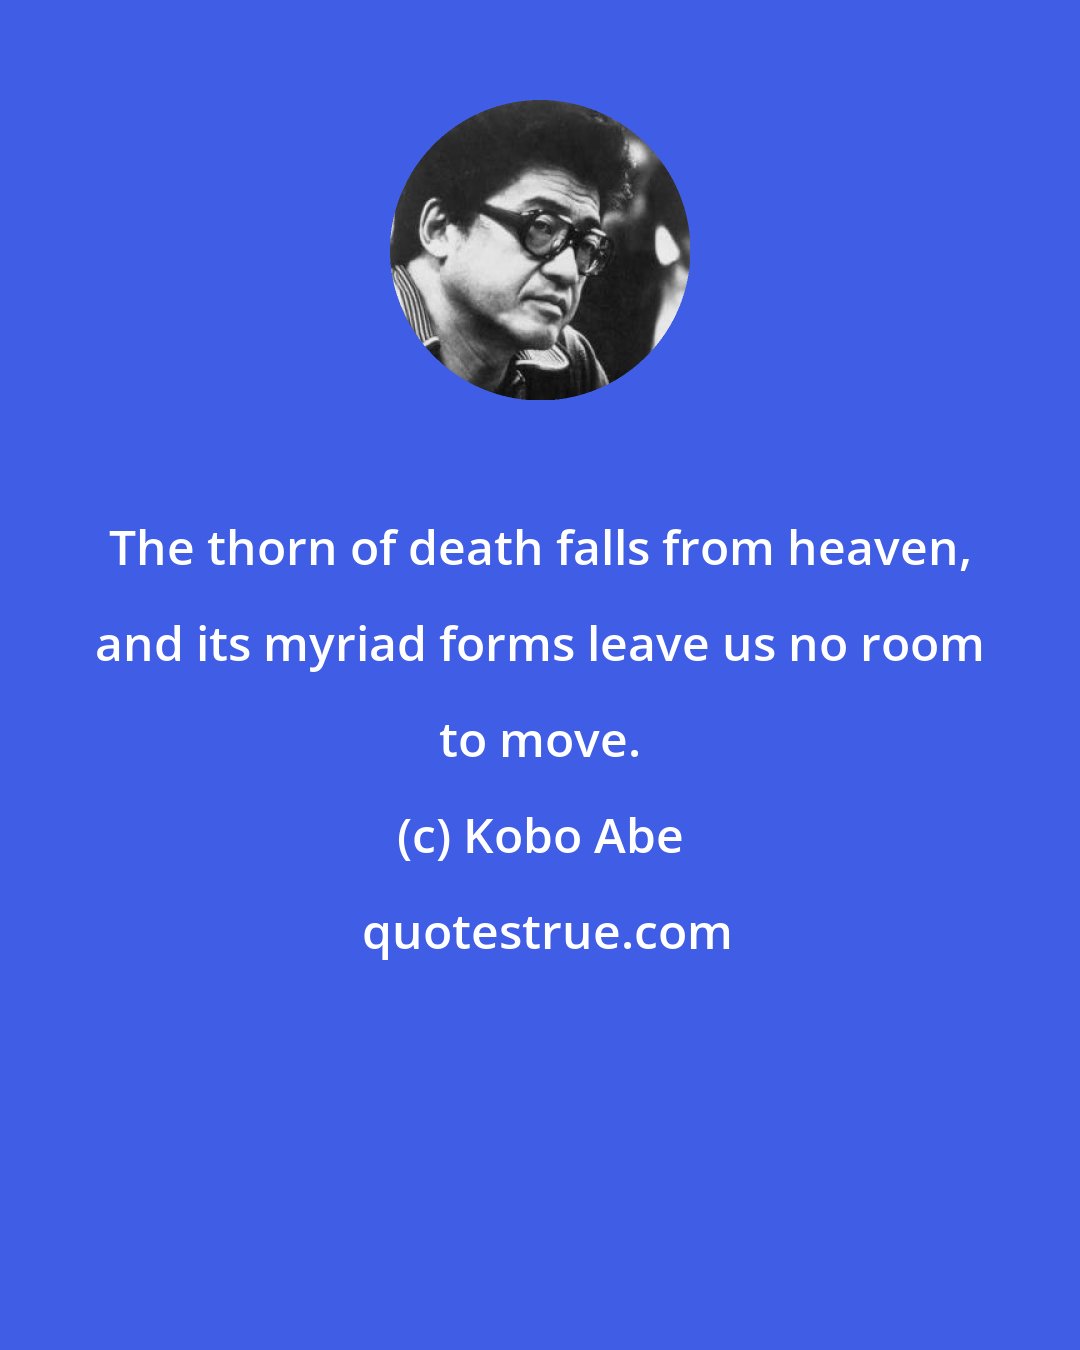 Kobo Abe: The thorn of death falls from heaven, and its myriad forms leave us no room to move.